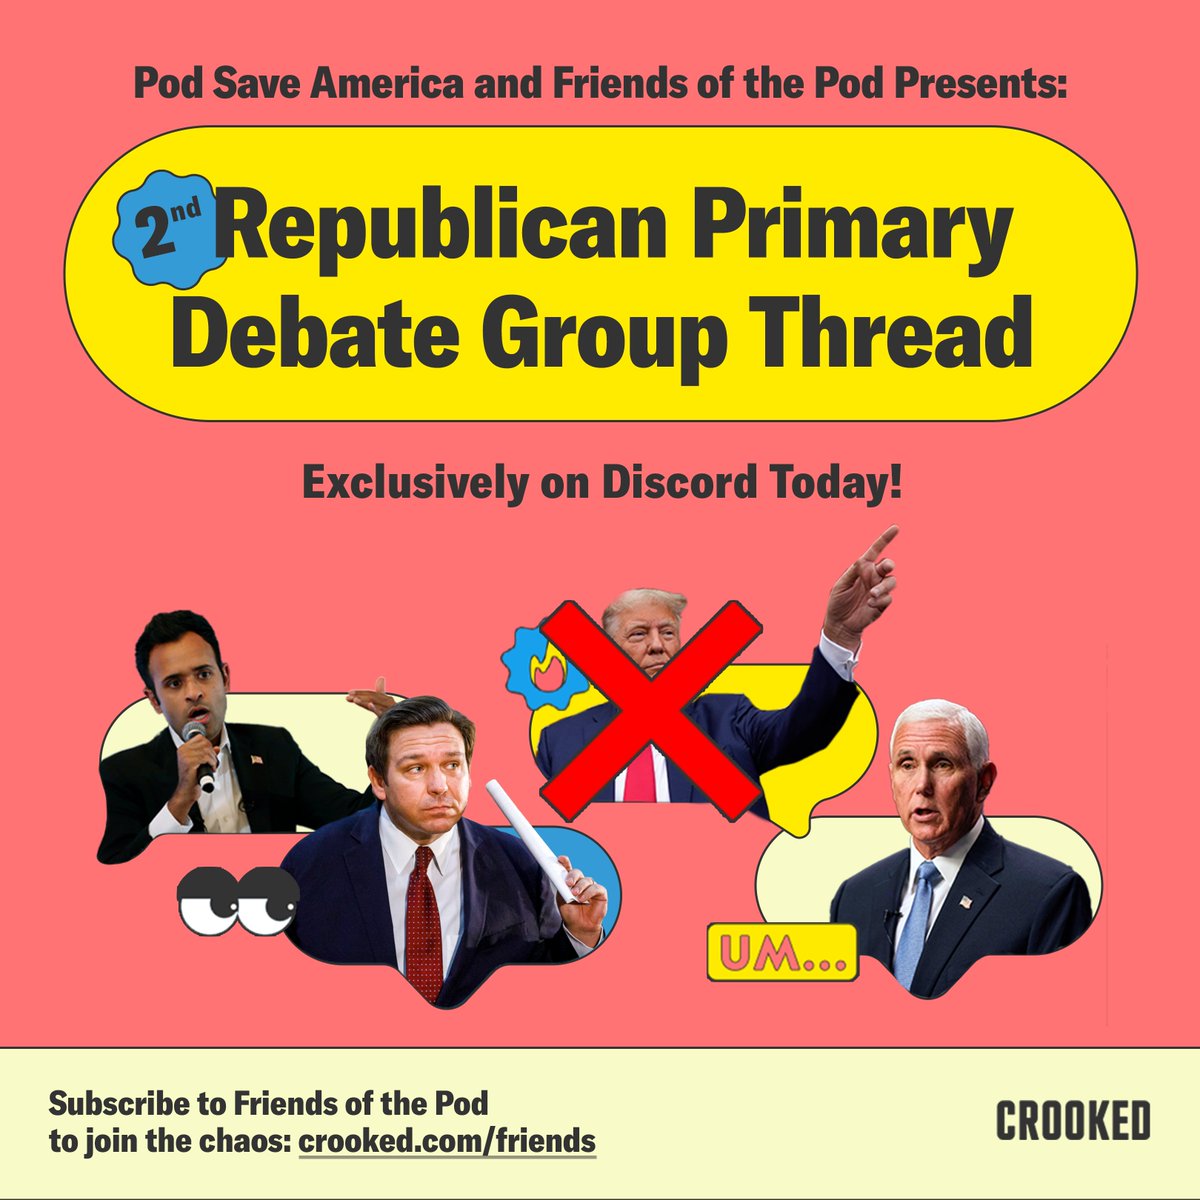 Looking for someone to watch tonight's Republican primary debate with? Subscribe to Friends of the Pod and join our Discord where we can laugh and cry together. crooked.com/friends